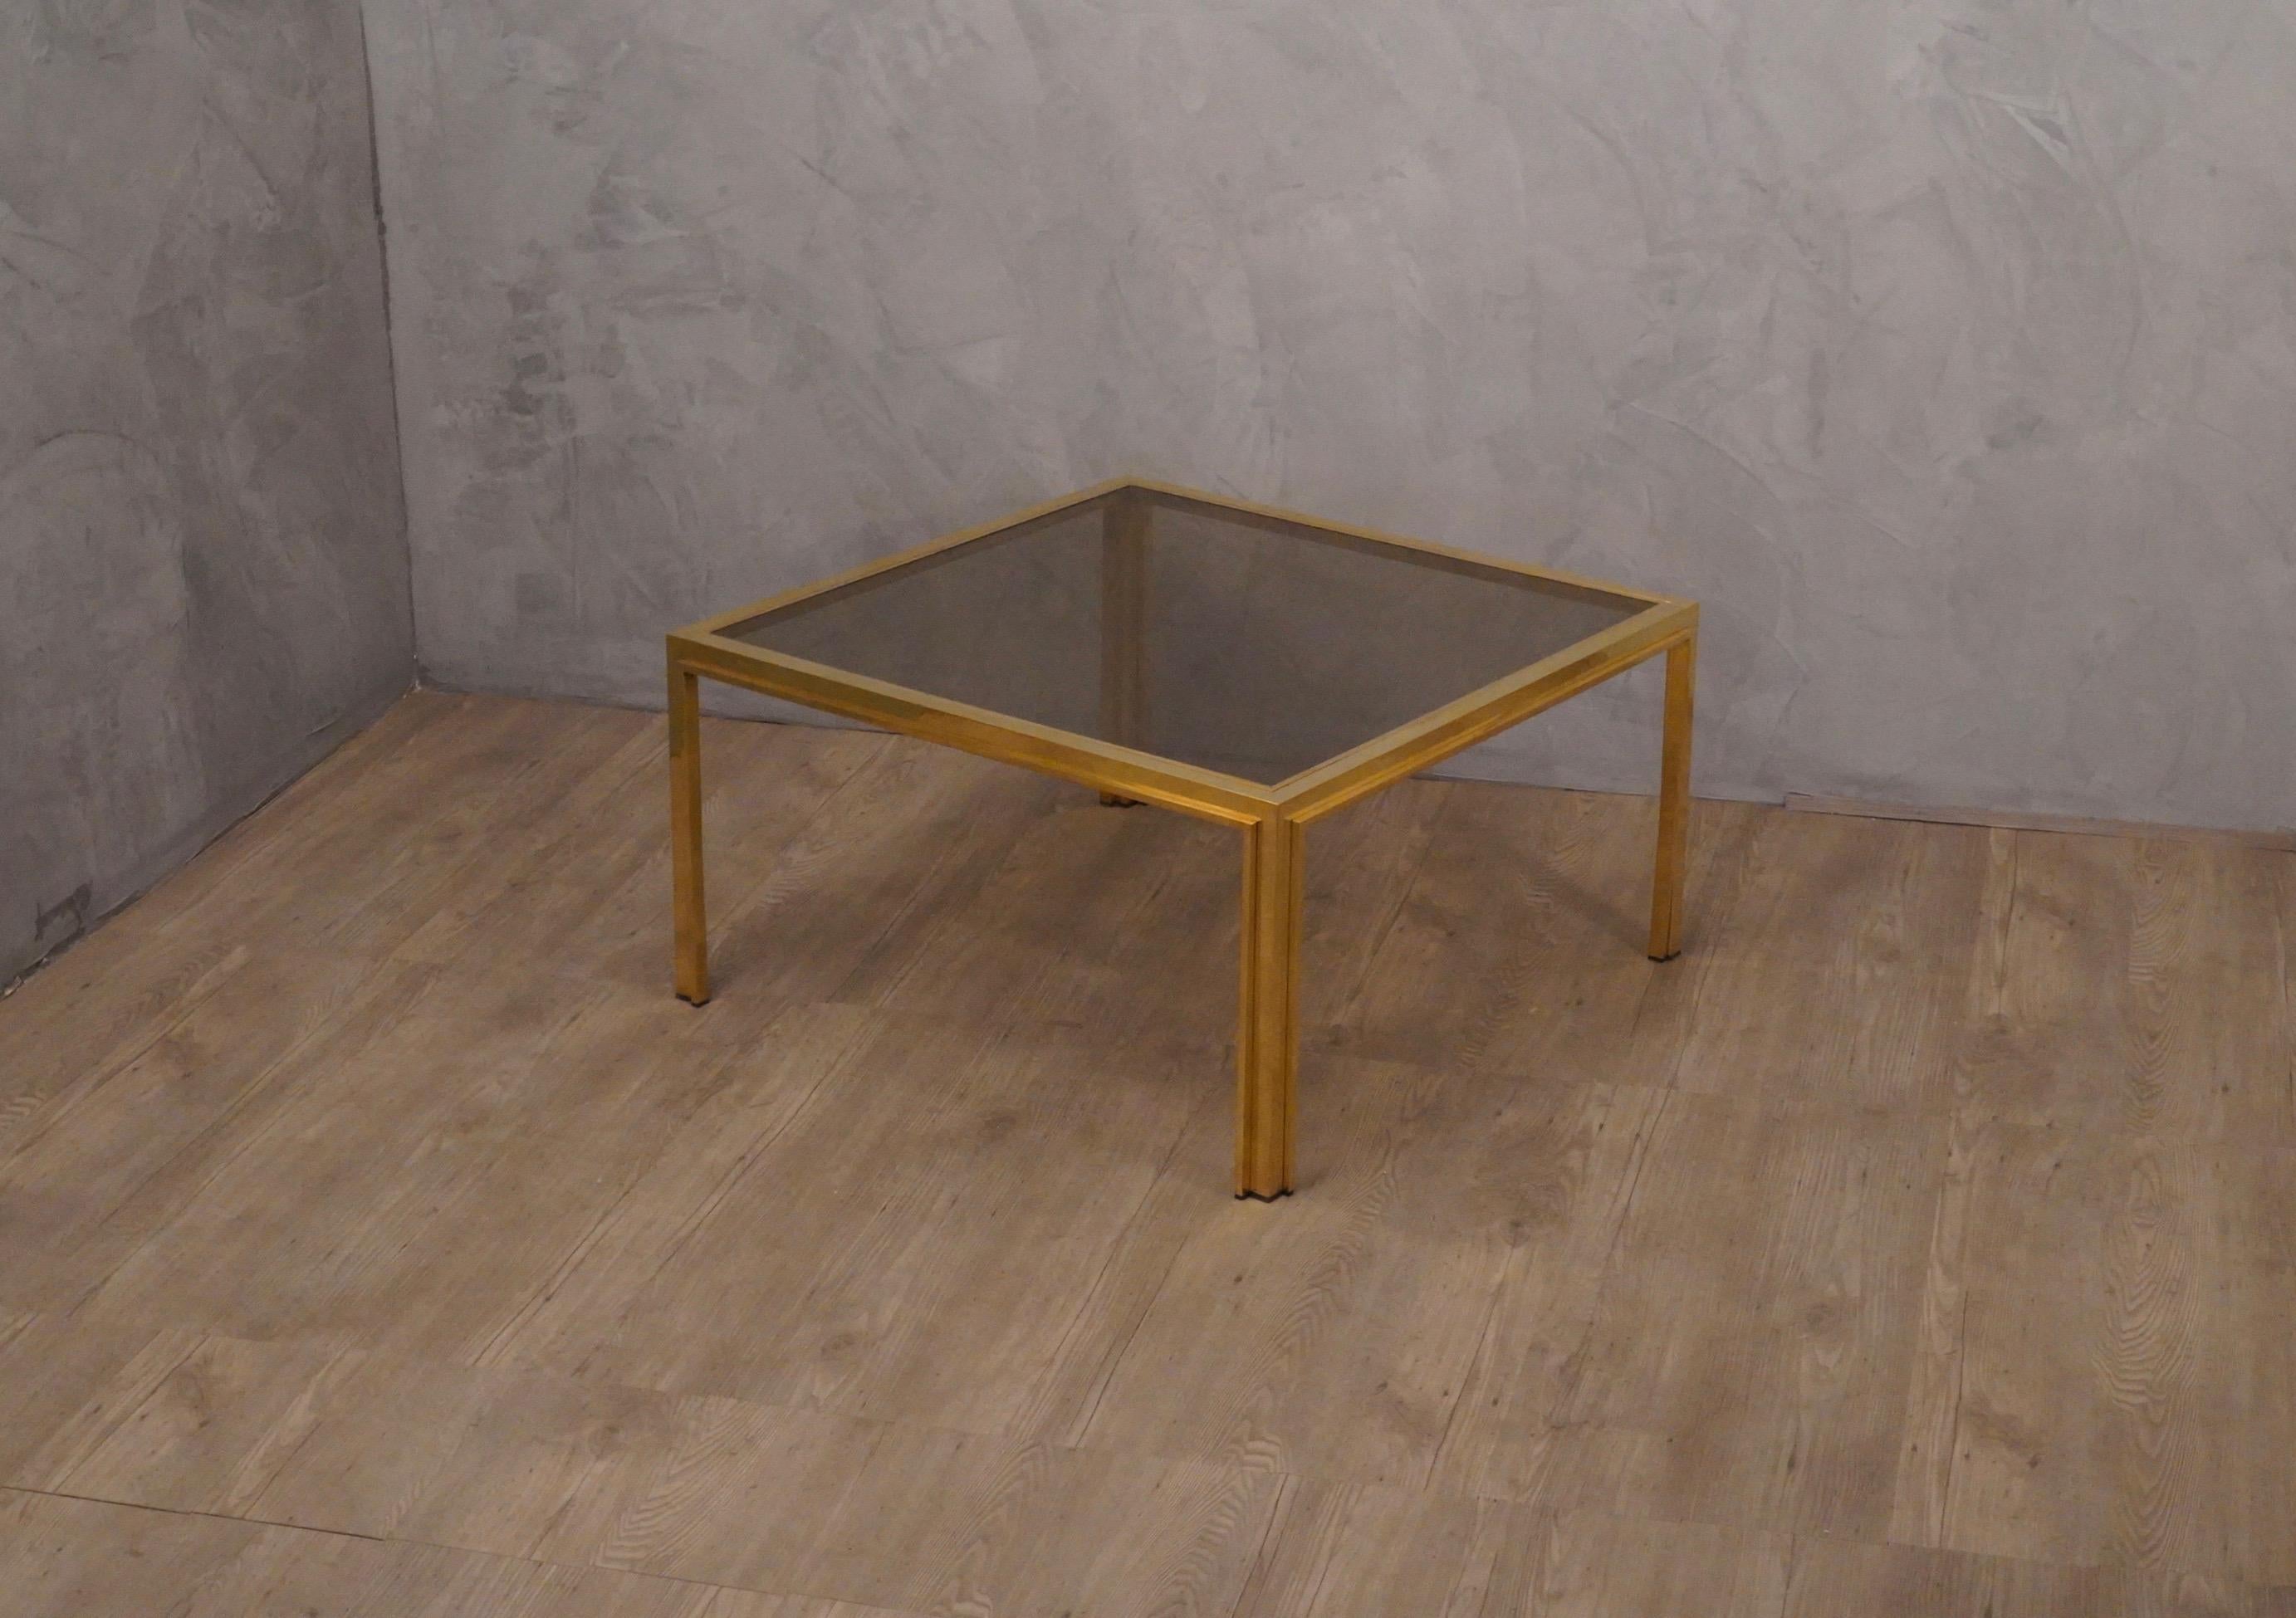 Romeo Rega Midcentury Square Brass and Glass Sofa Table, 1970 For Sale 8